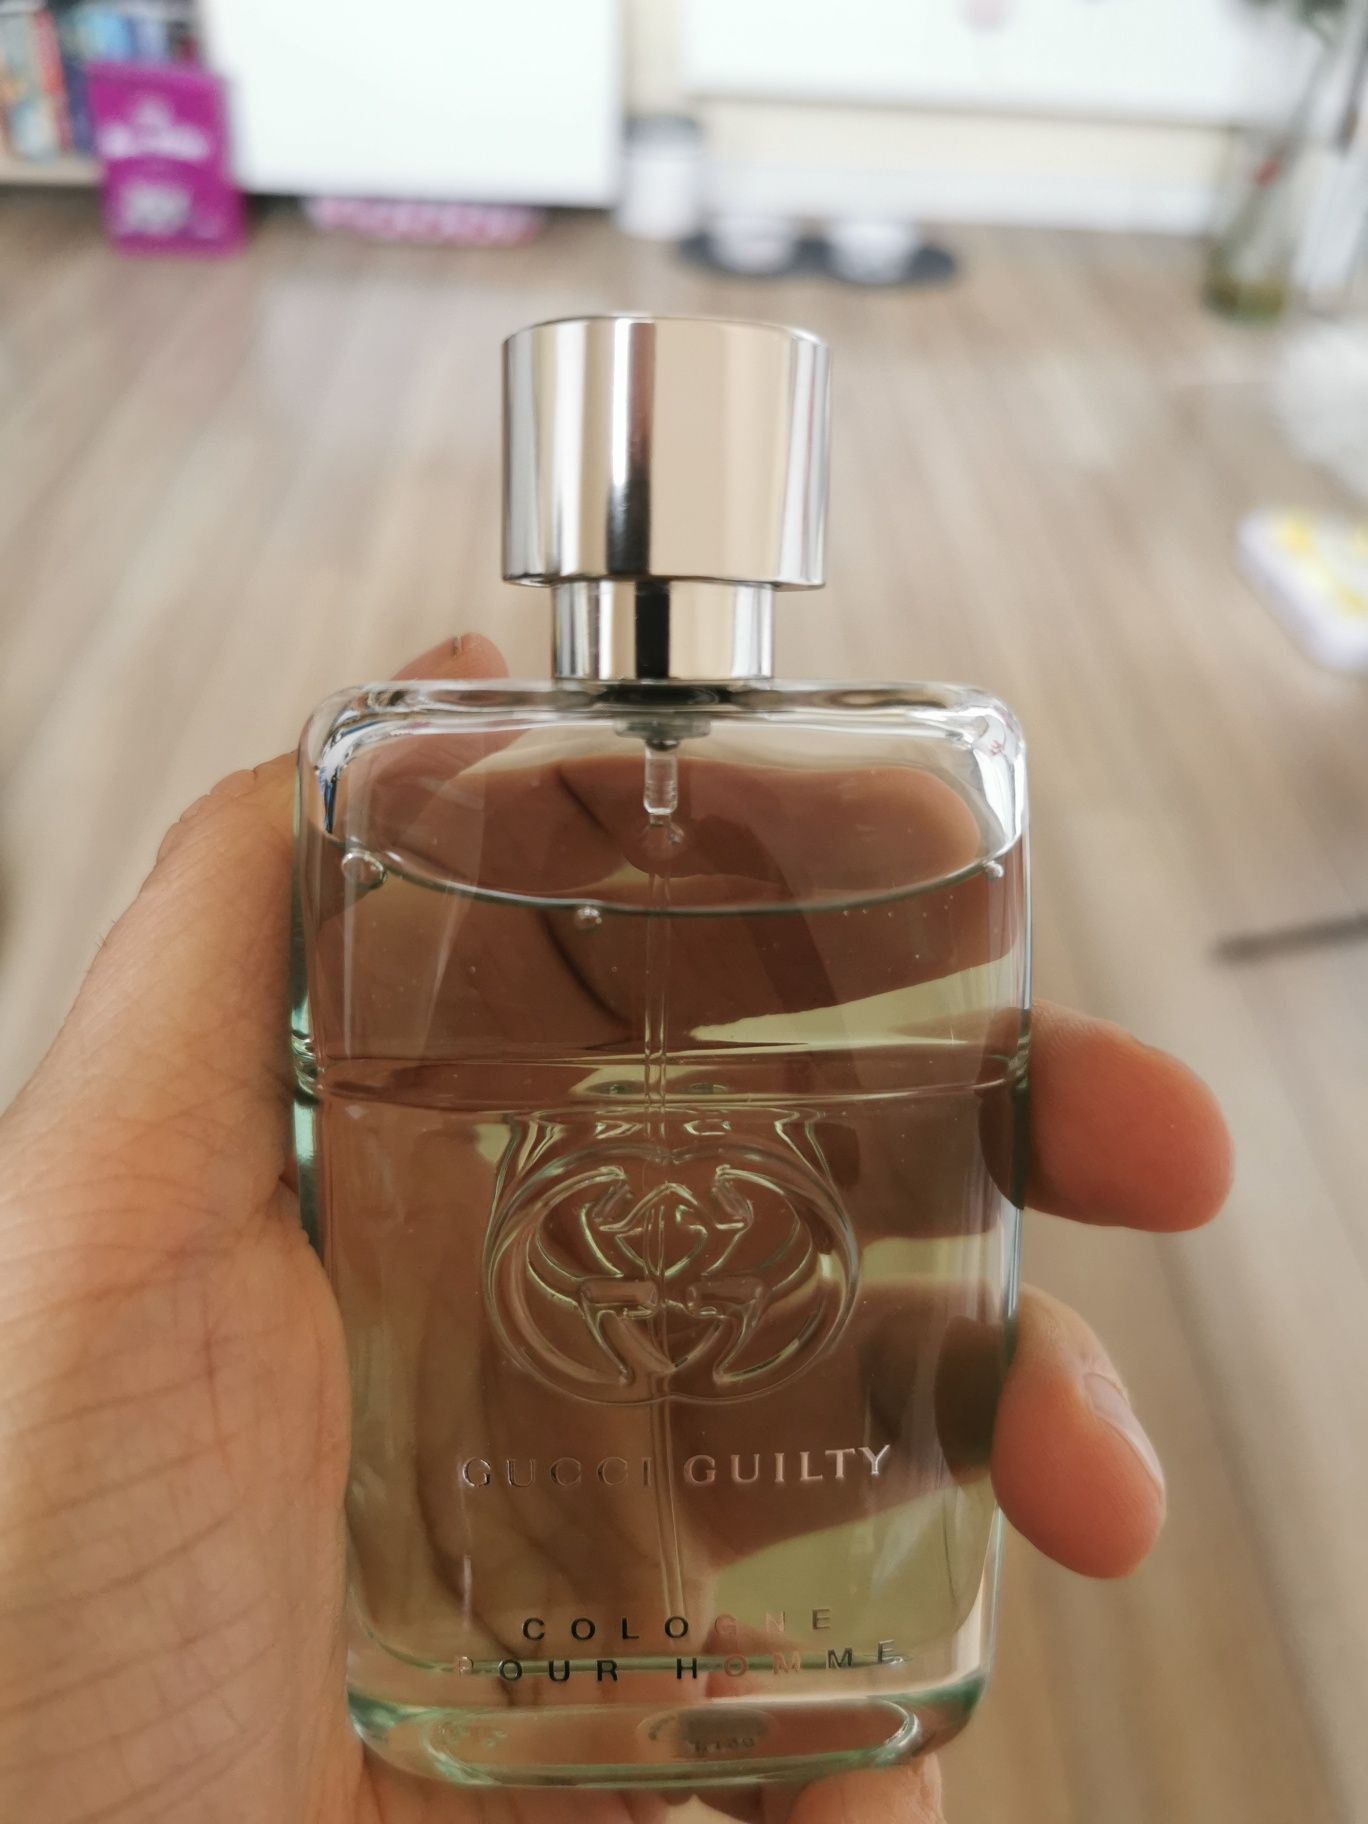 Gucci guilty cologne edt 50ml